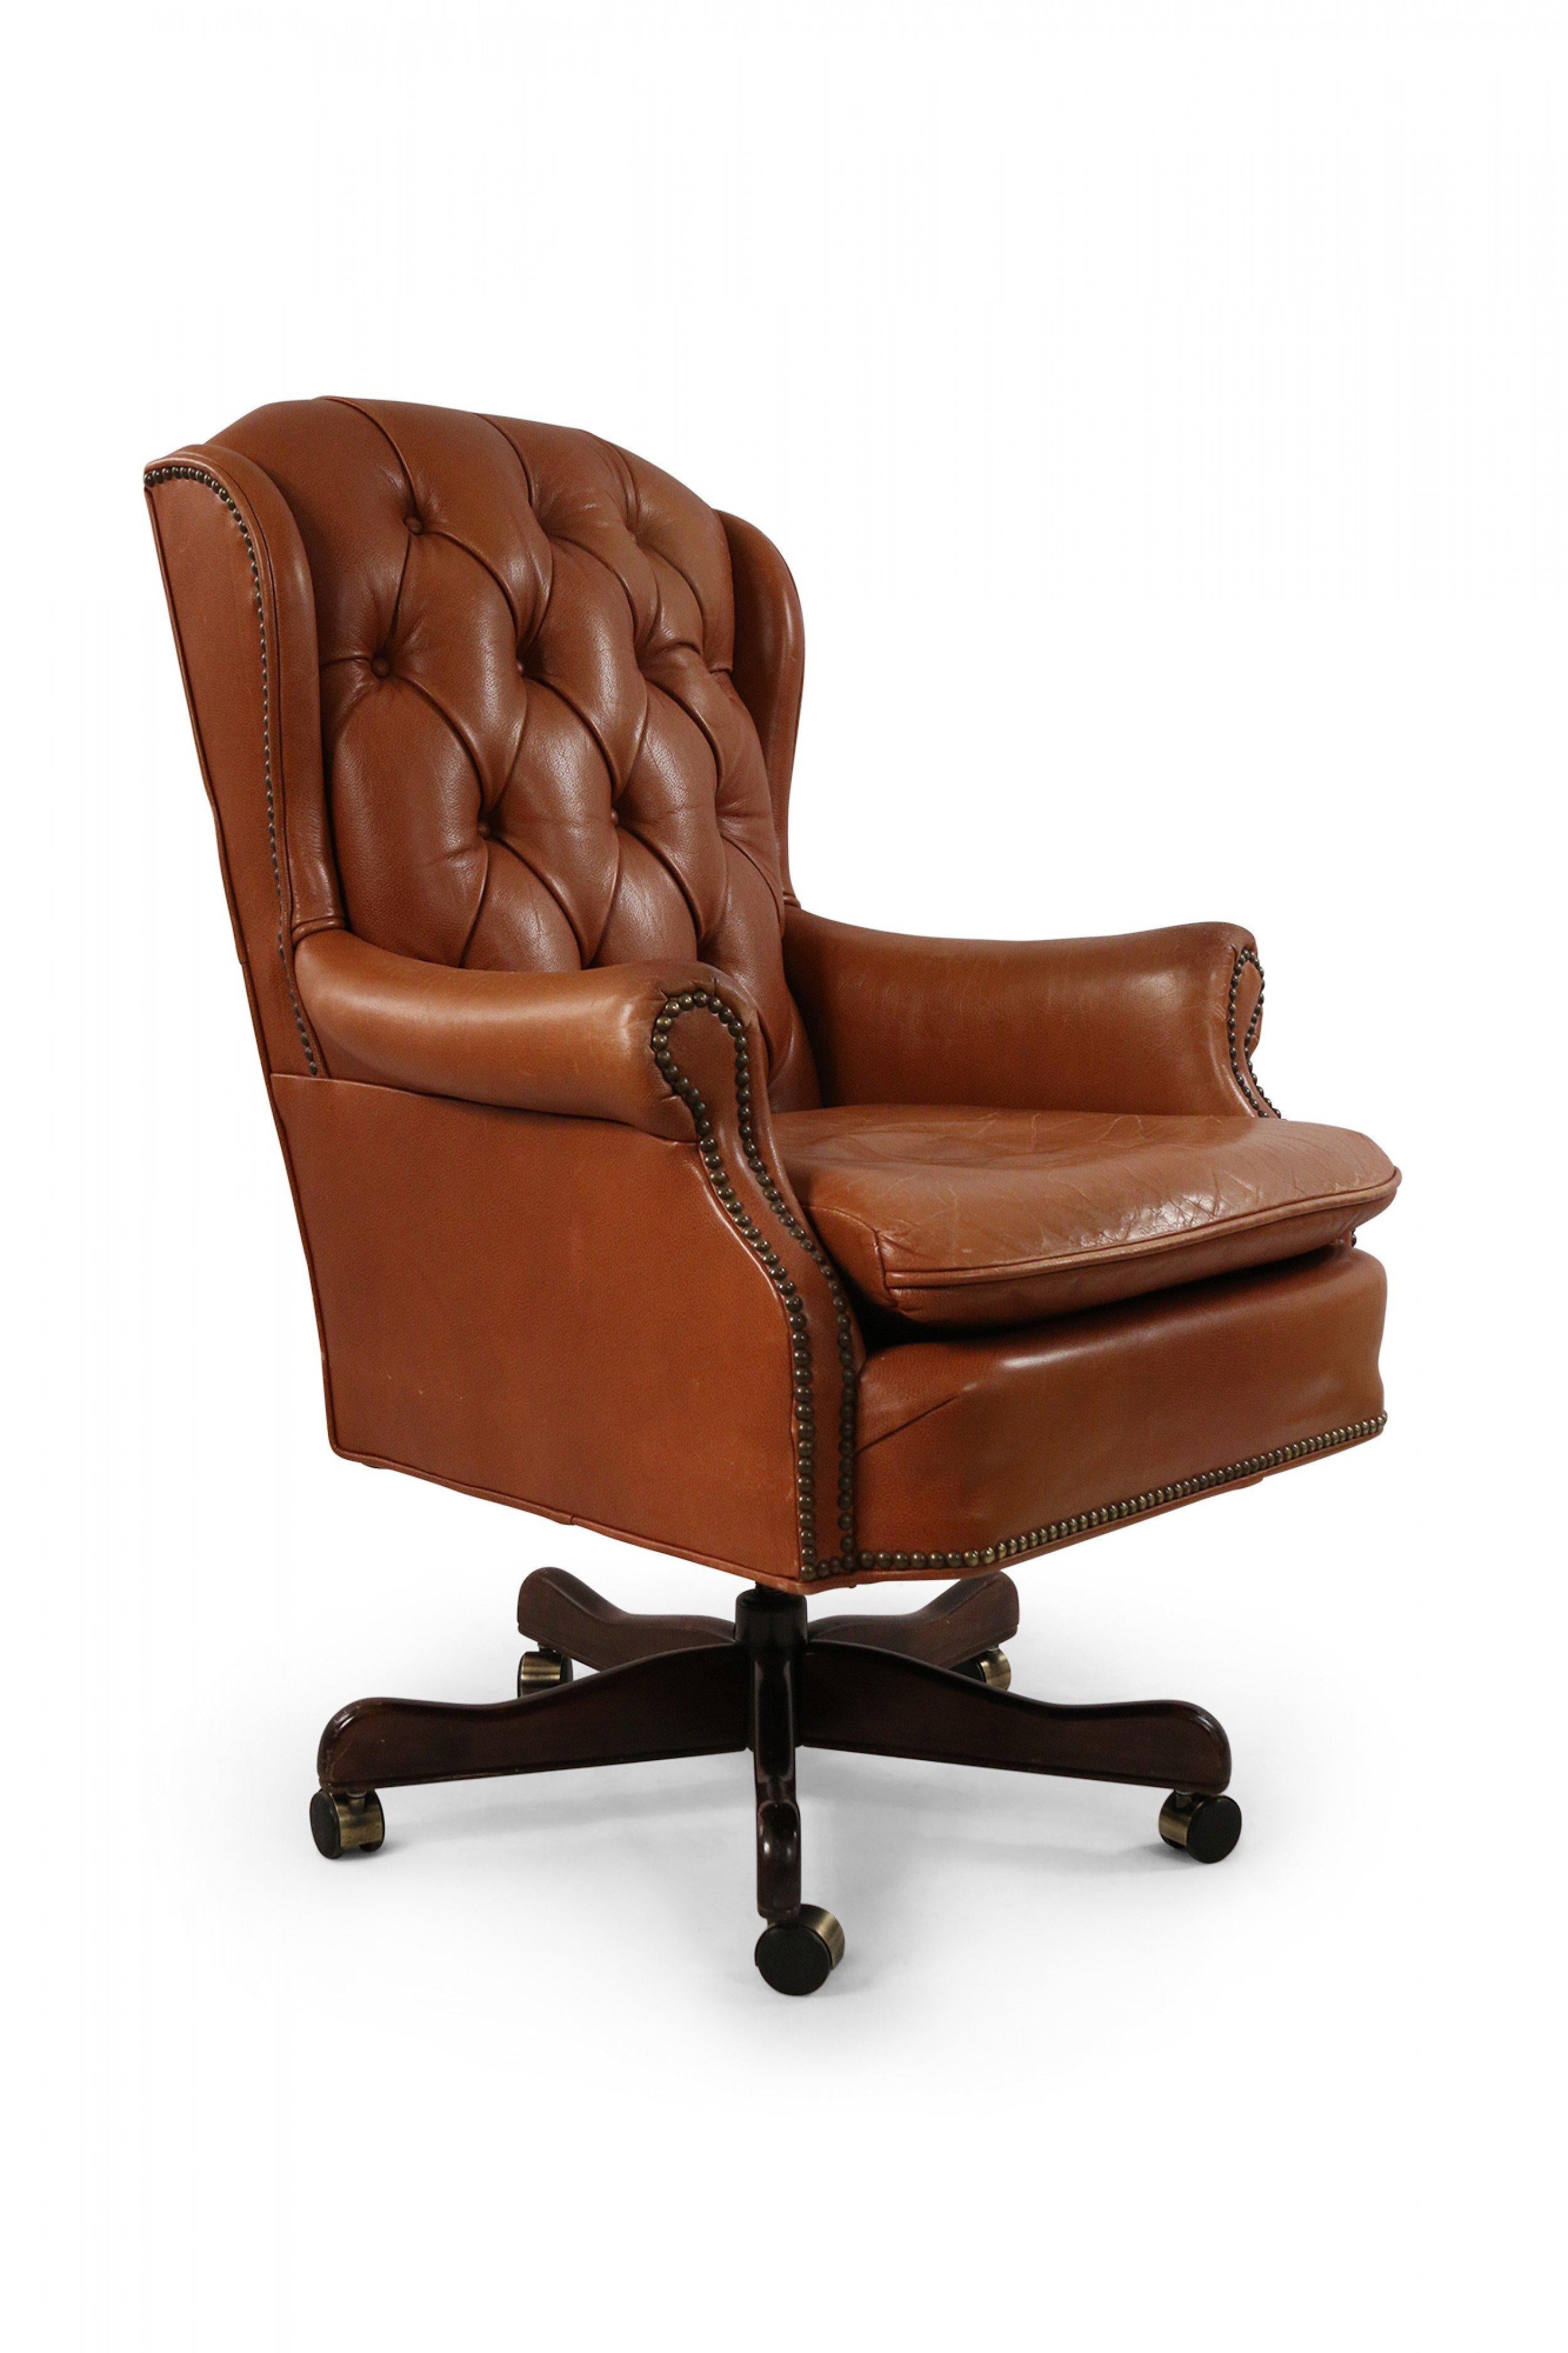 Mid-Century American Brown Tufted Leather Swivel Office / Armchair For Sale 12